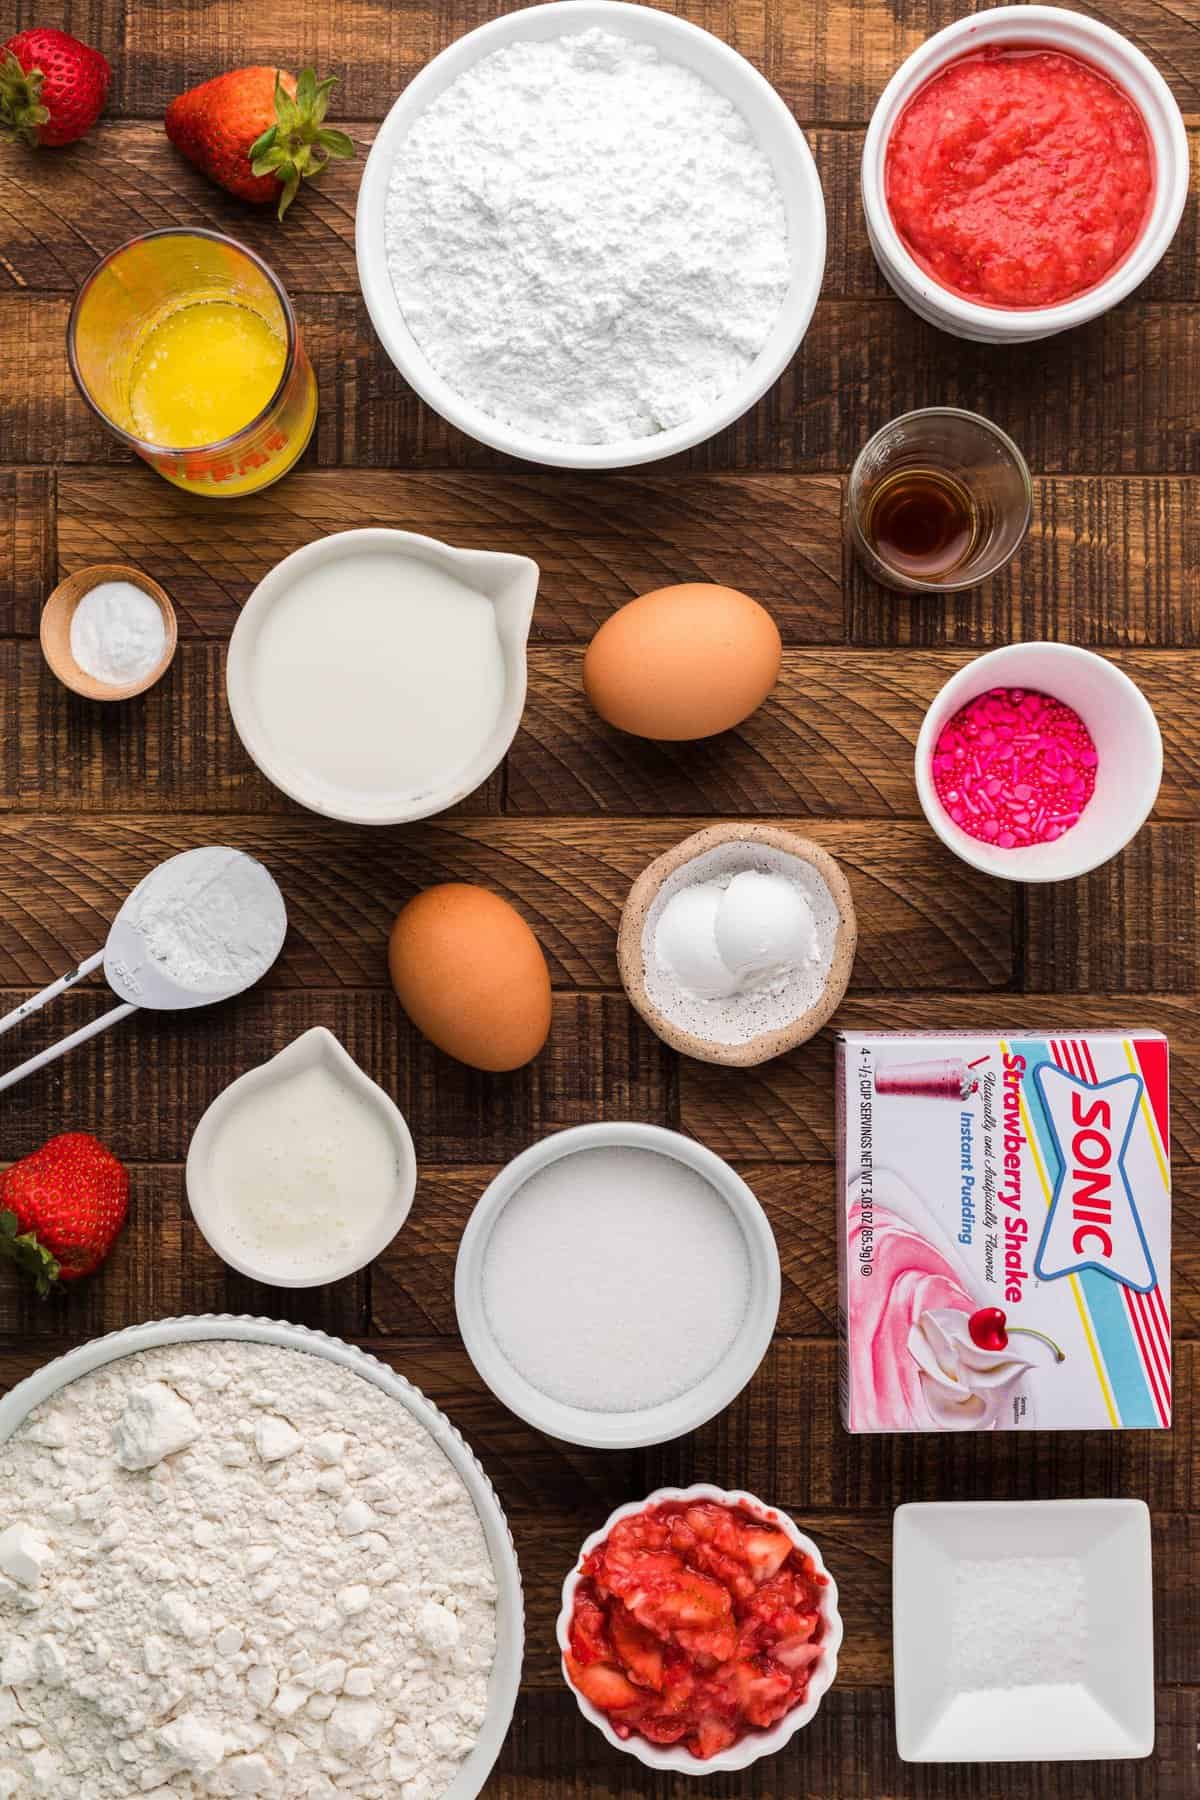 Ingredients to make the strawberry donuts on a wooden backdrop.